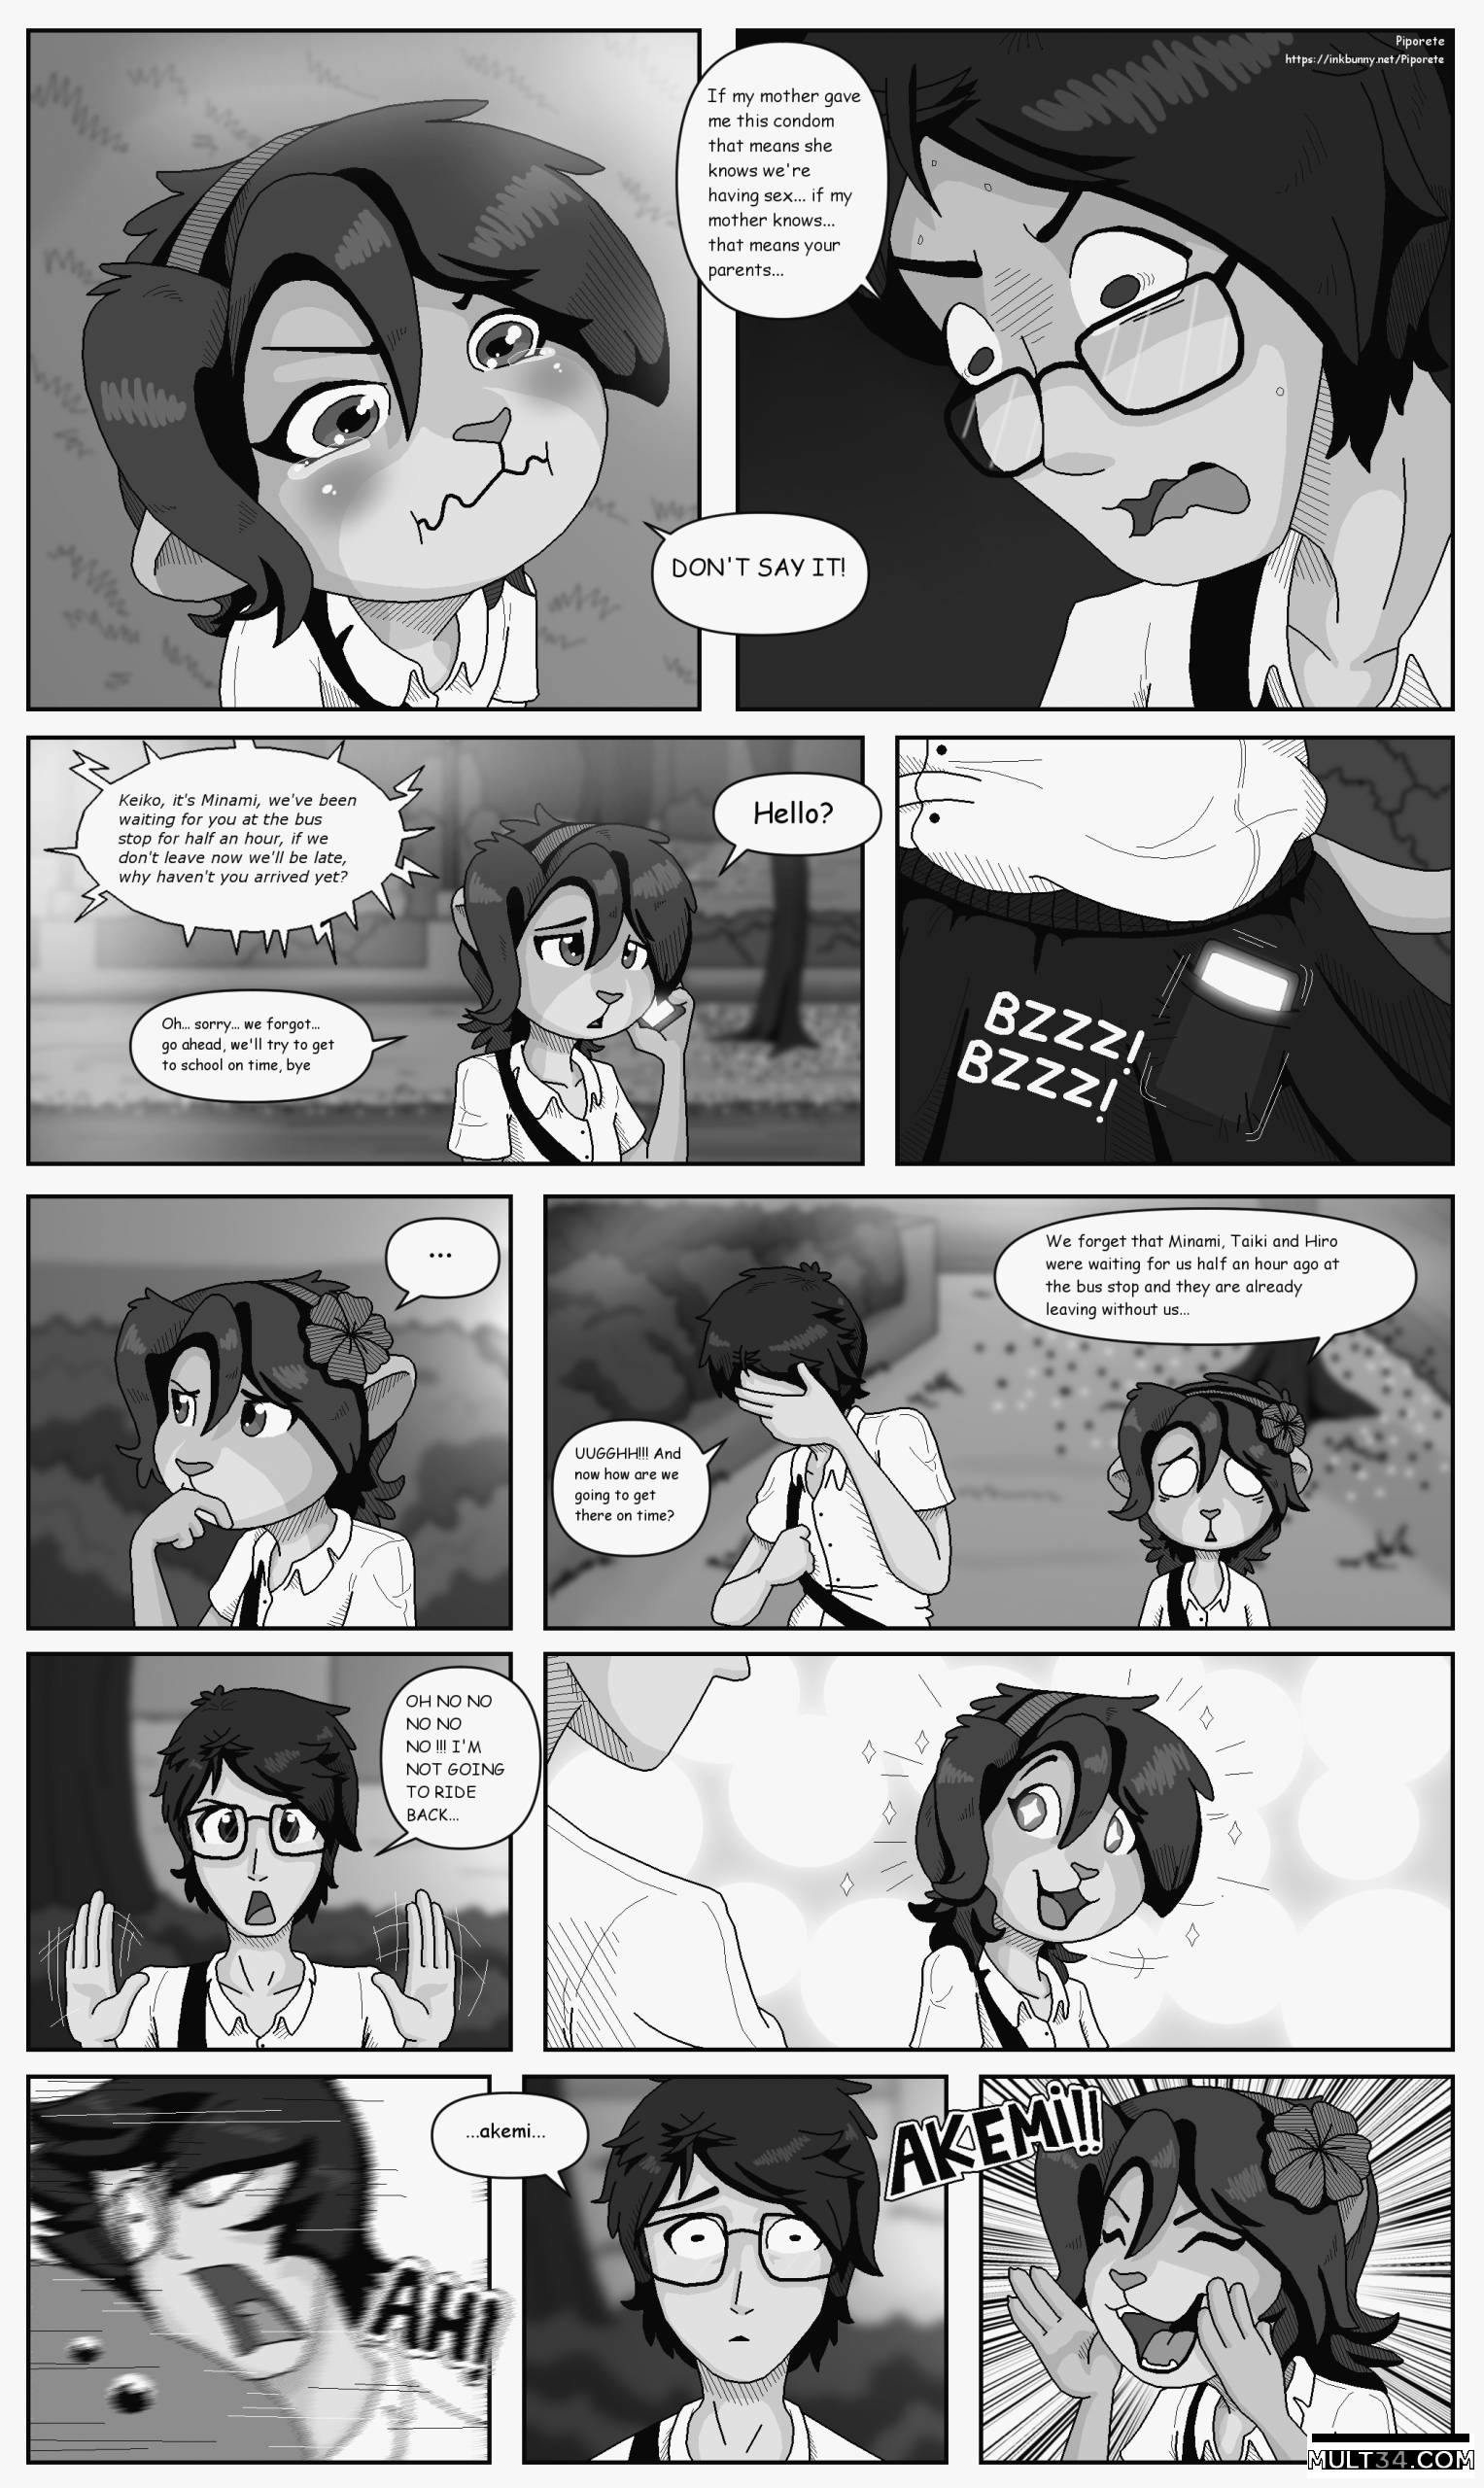 Keiko and Jin - Chapter 1 - 3 page 22